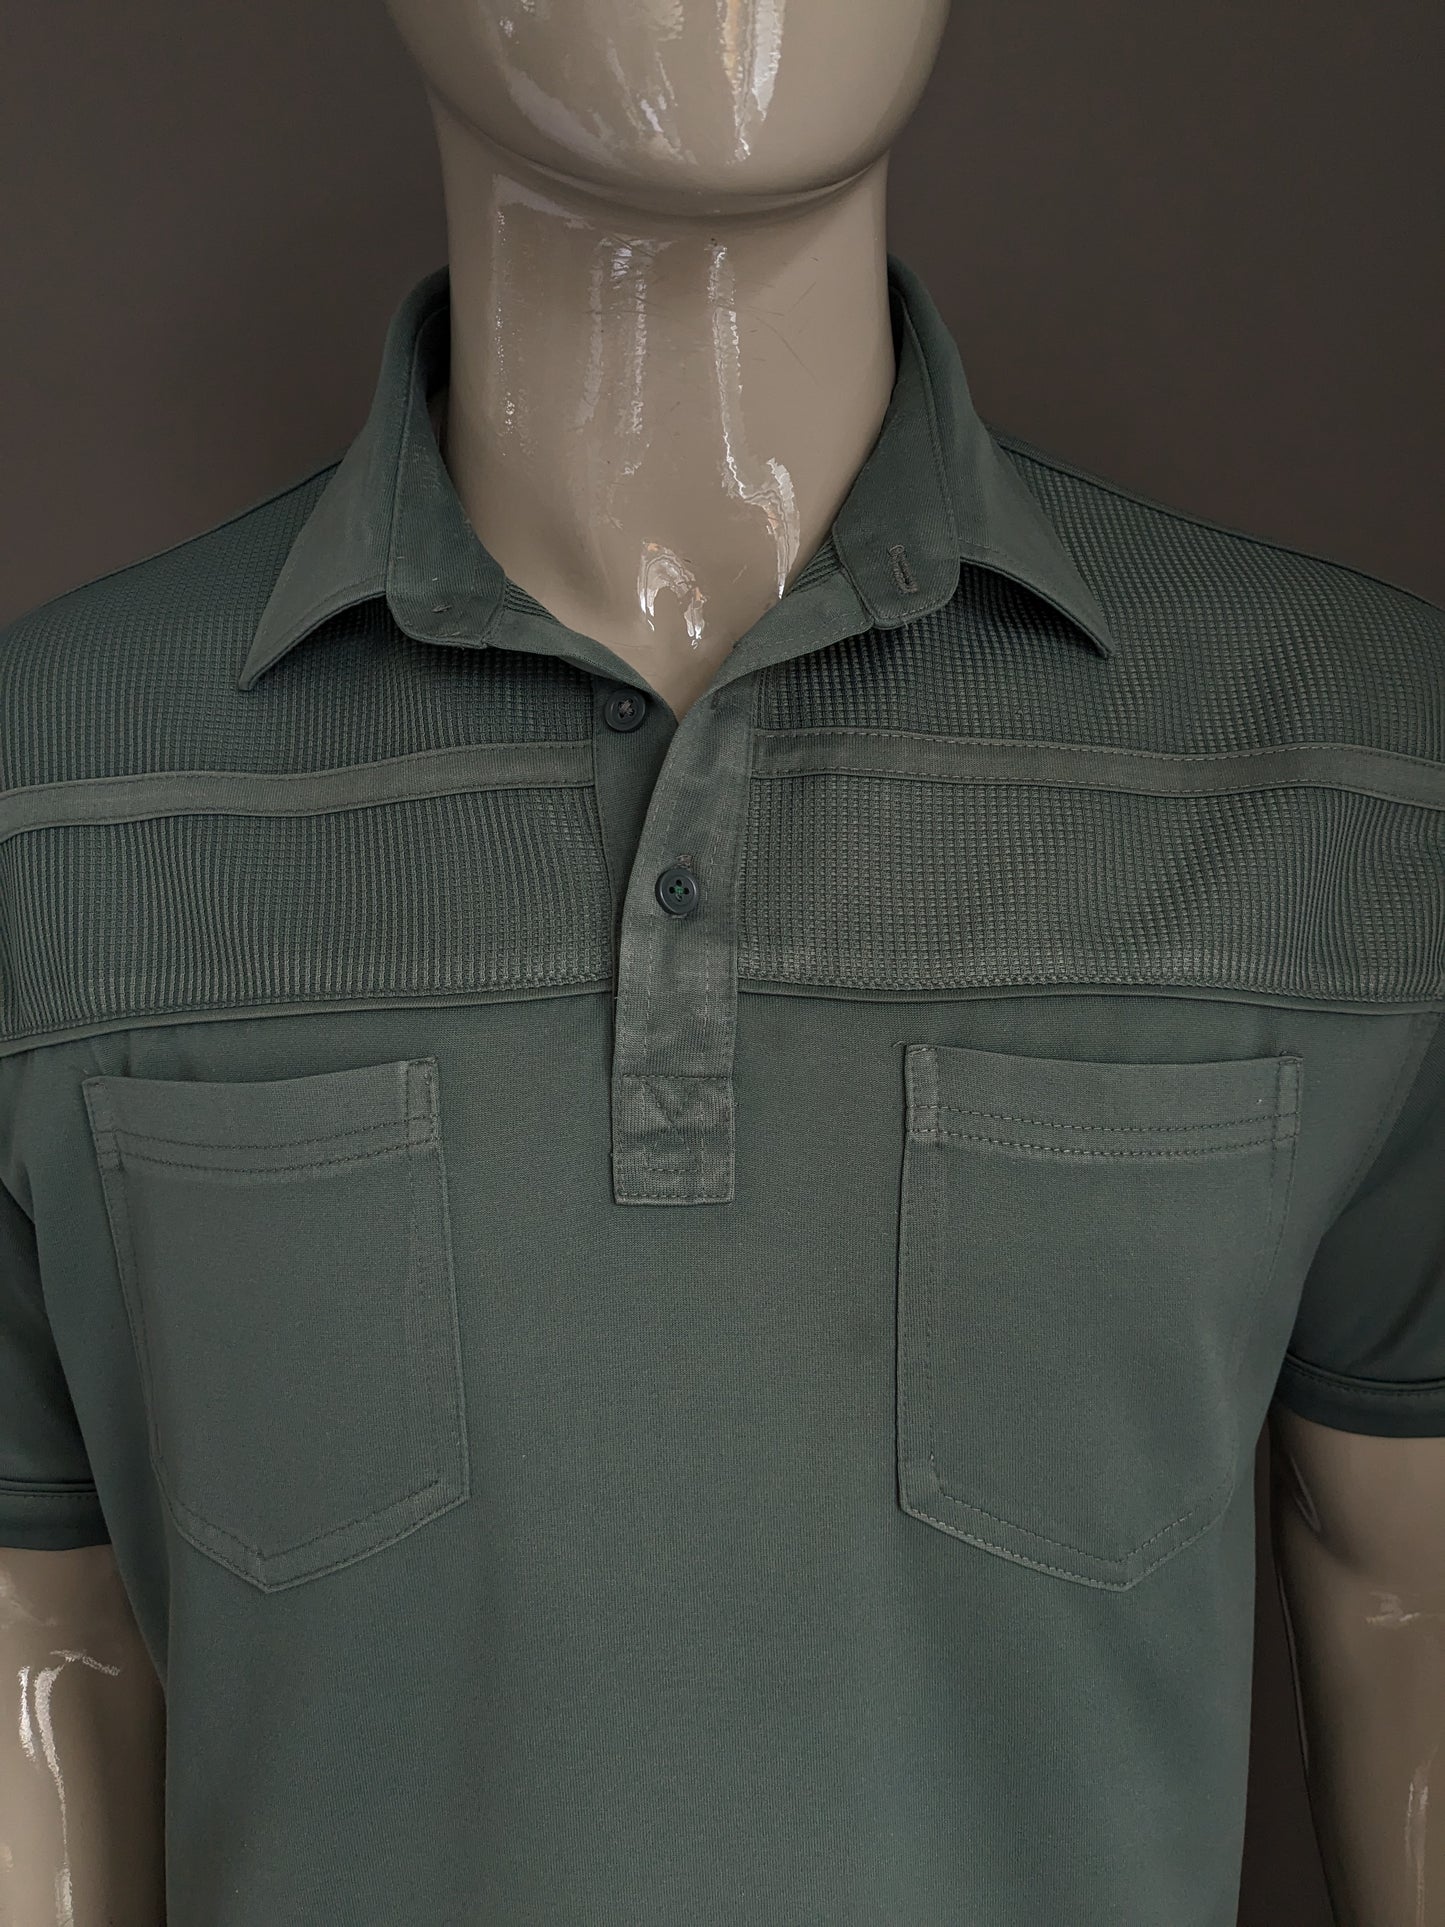 Vintage Canda Polo with elastic band. Green. Size XL.